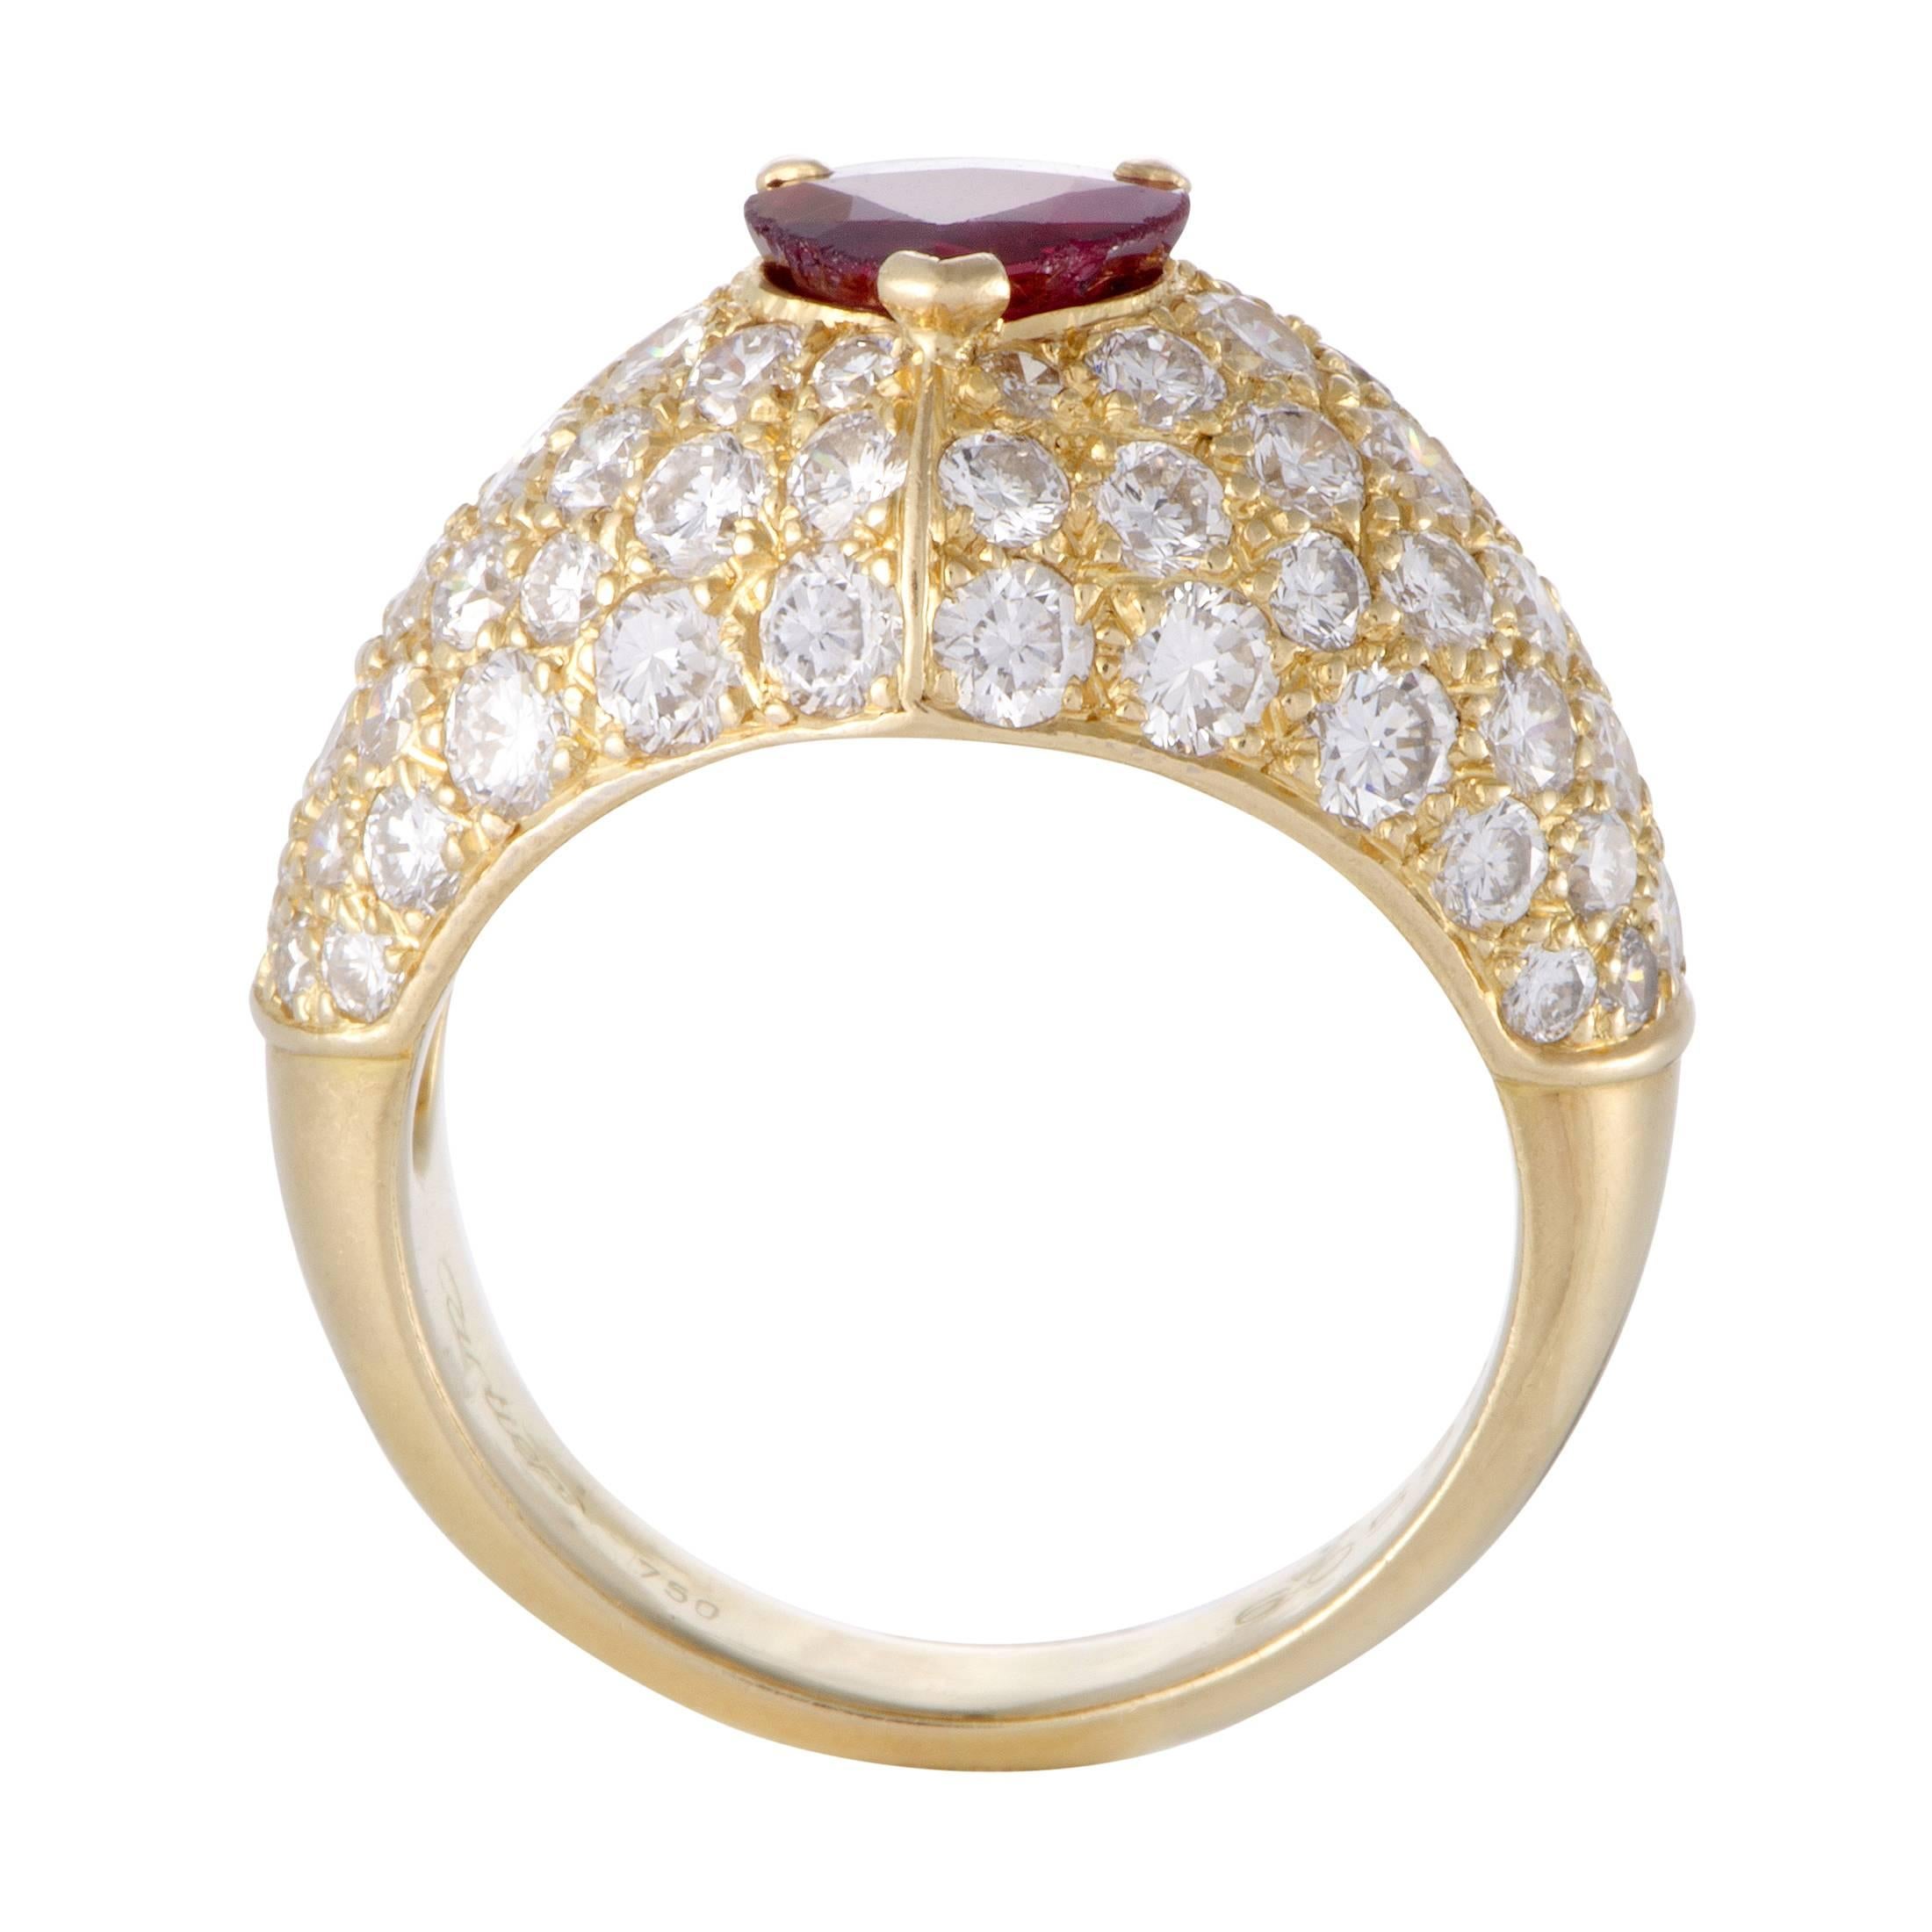 Provided glamorous backdrop by the radiant 18K yellow gold and scintillating diamonds amounting approximately to 2.25 carats, the glorious ruby weighing 1.00 carat produces a memorable allure in this fascinating ring from Cartier.
Included Items: